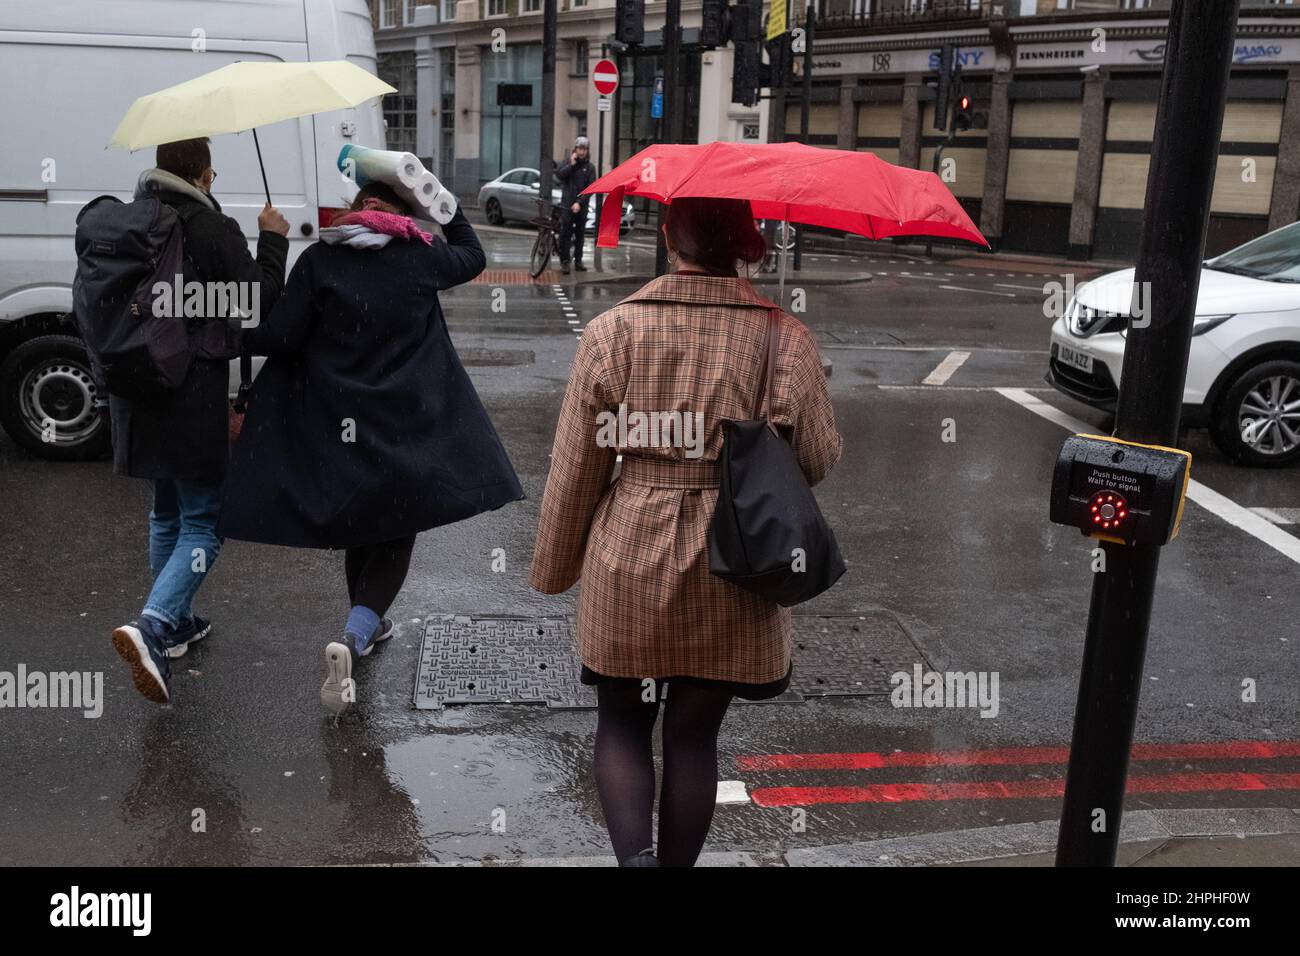 Brollies up, its another wet and windy day in London UK Stock Photo